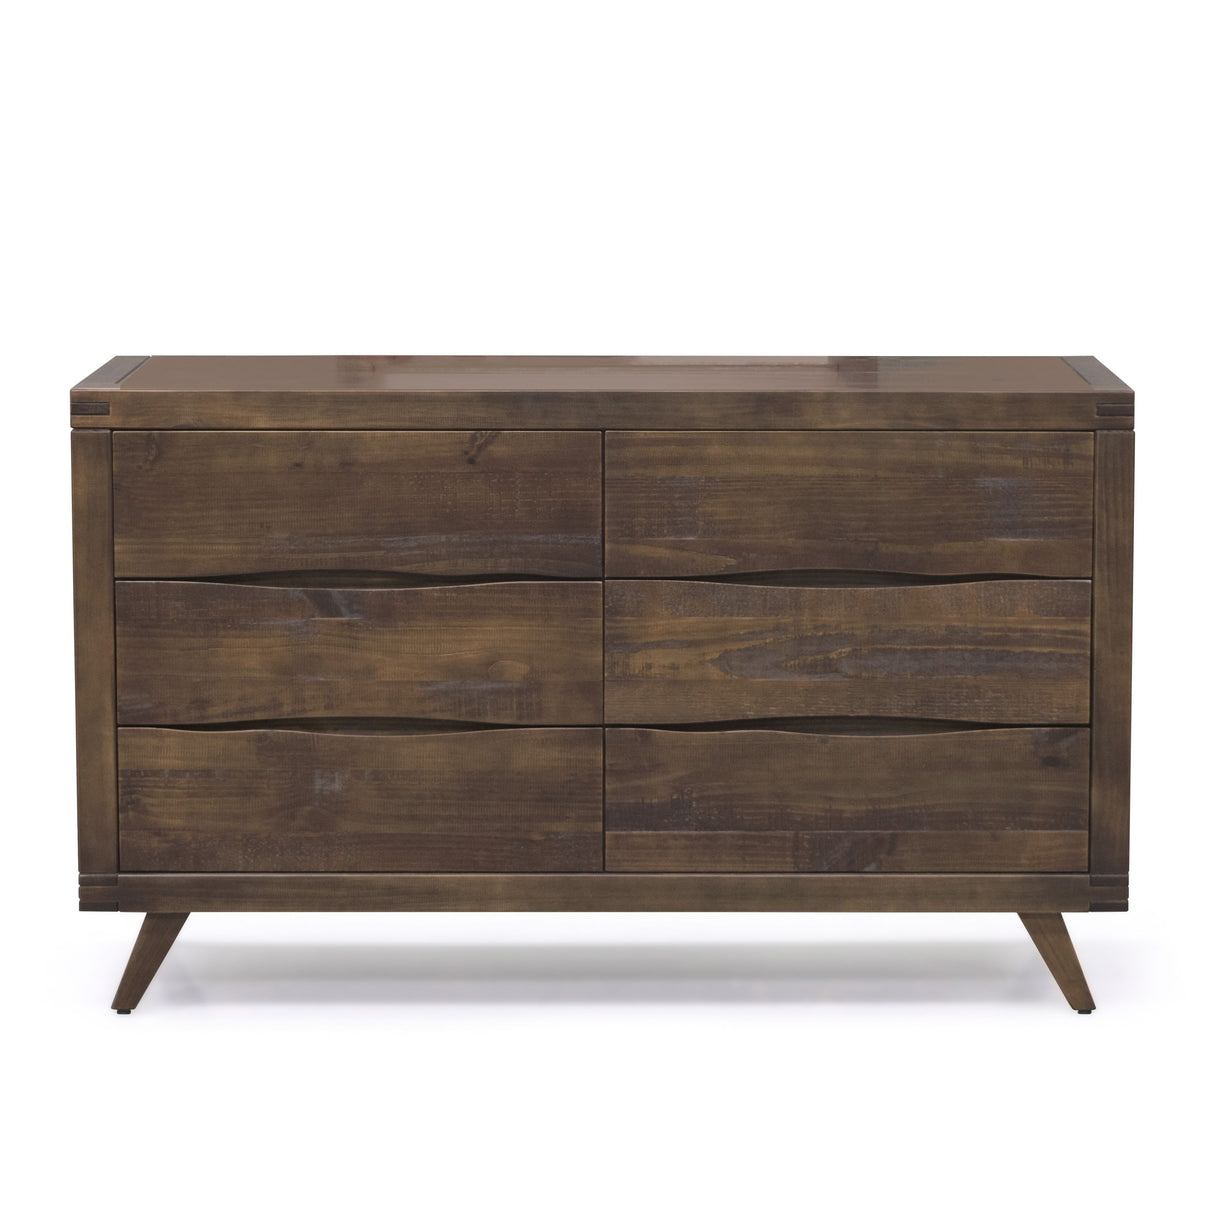 Pasco - Dresser With Glides - Brown